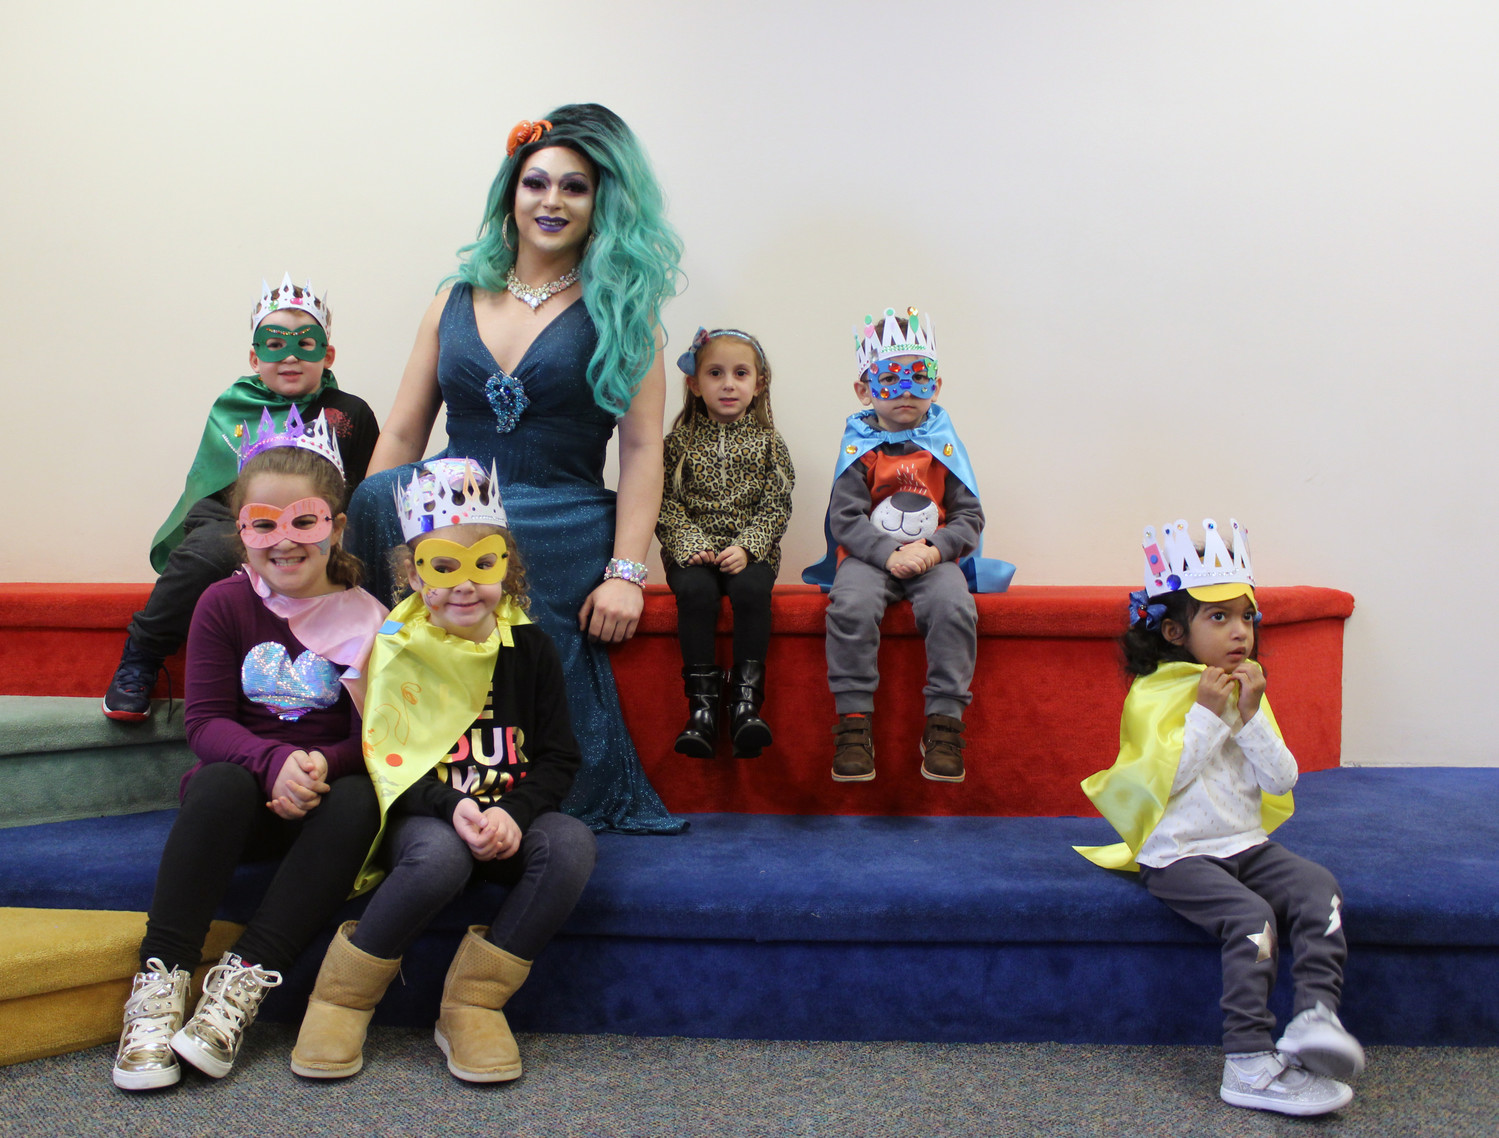 After reading several books about tolerance and inclusivity, Noche complimented children as they created their own crowns and superhero capes and masks. From left were Aiden O’Callaghan, 5, Angelina and Viviana Frisch, 6 and 4, Olivia Longo, 4, Xazar Karimou, 4, and Leilani Grant, 3, all of East Meadow.